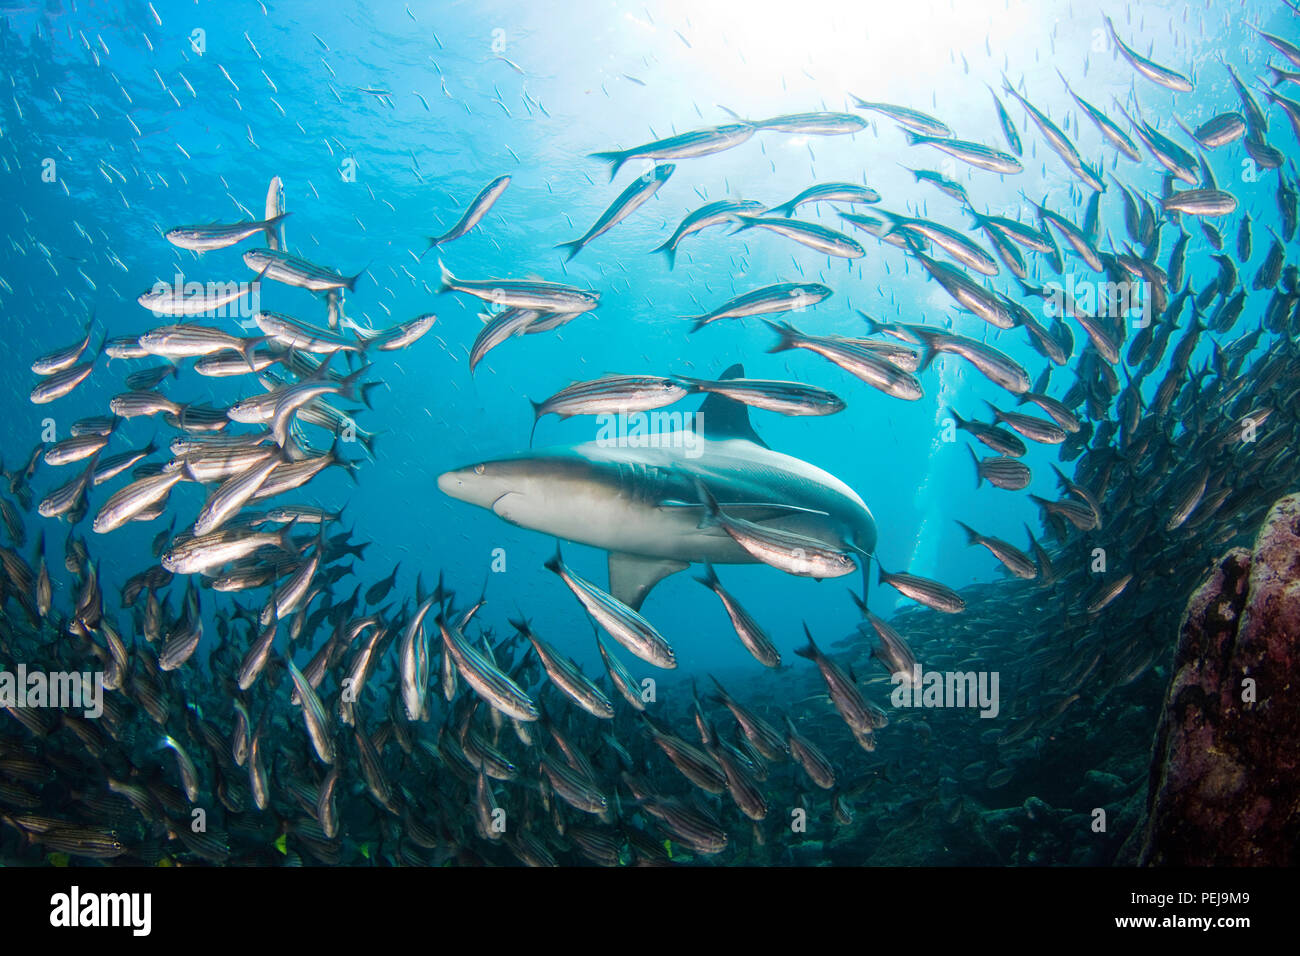 A Galapagos shark, Carcharhinus galapagensis, opens a hole in a school of black striped salema, Xenocys jessiae (endemic), Galapagos Islands, Equador. Stock Photo